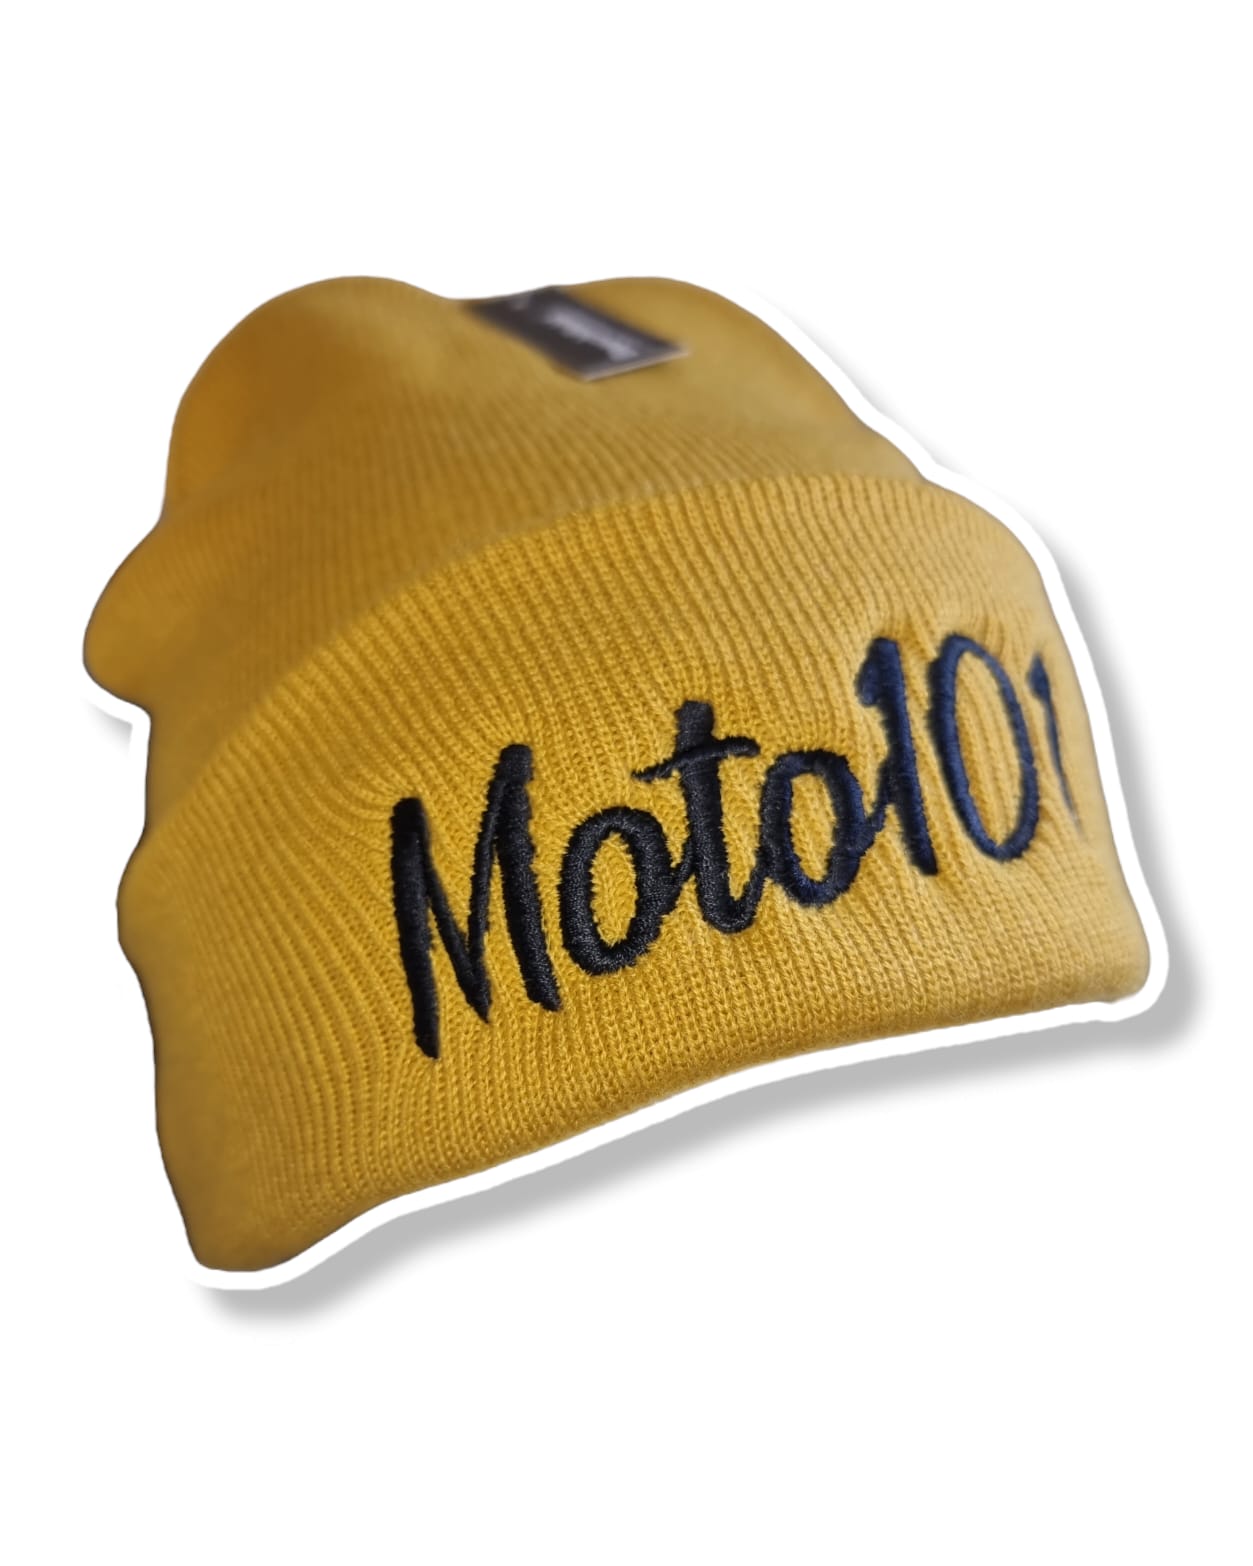 Moto101 Beanie in various colors with embroidered logo on the front, stylish and warm headwear for motorbike enthusiasts